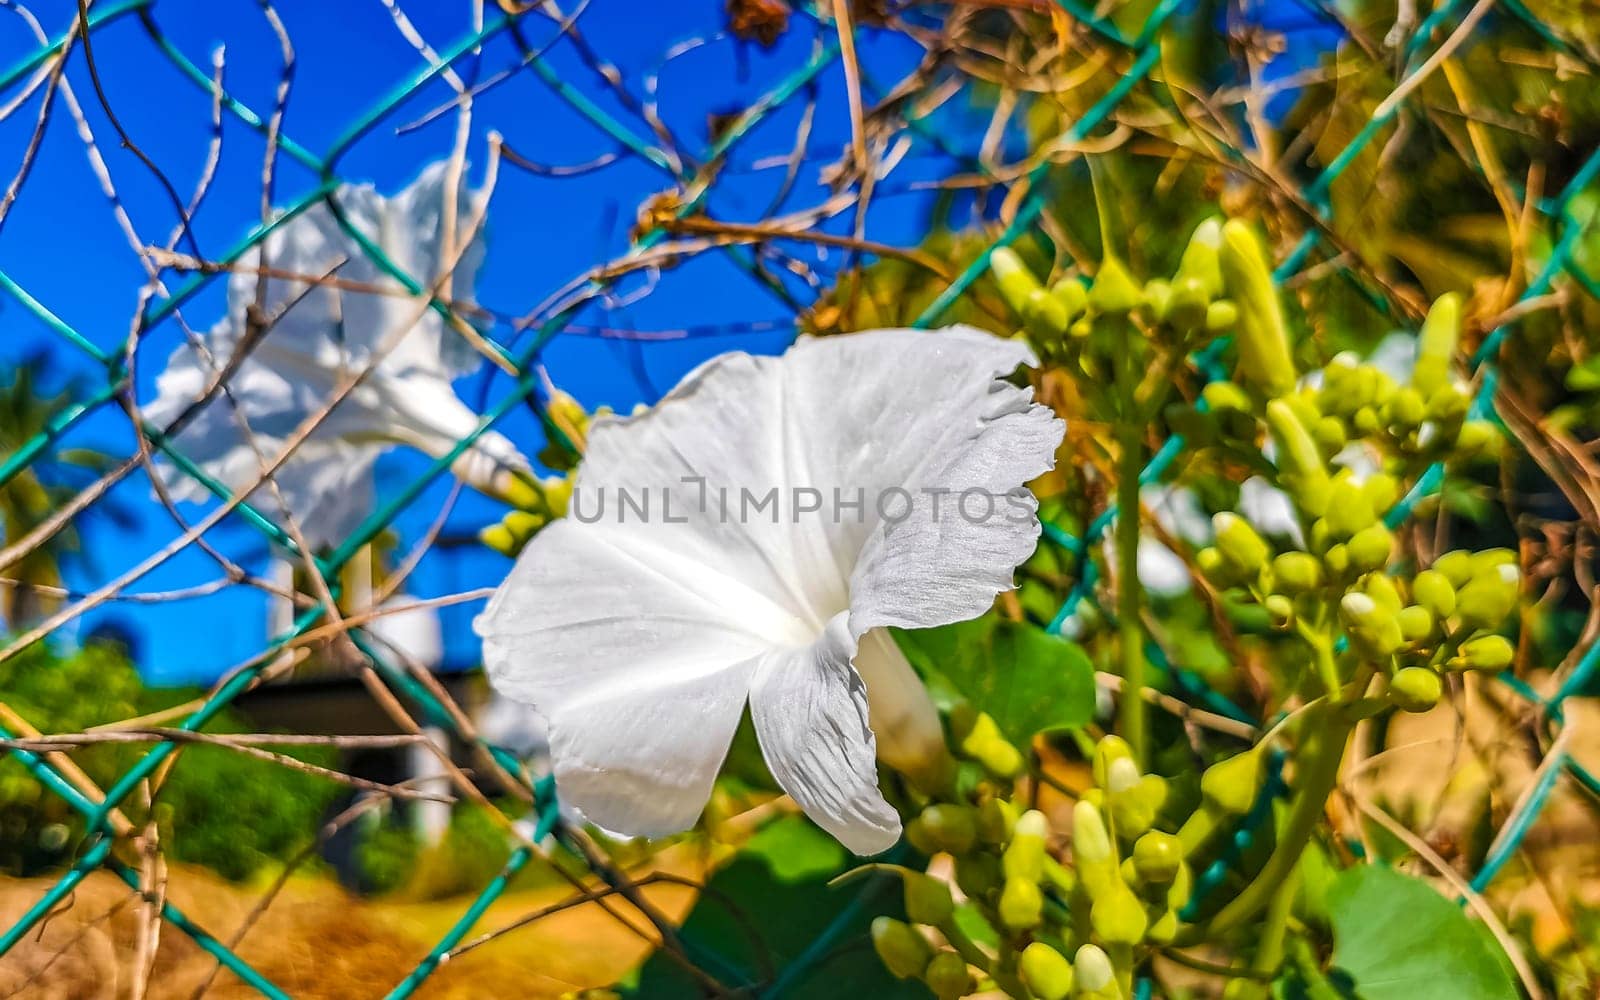 White tropical exotic flowers and flowering outdoor in Zicatela Puerto Escondido Oaxaca Mexico.